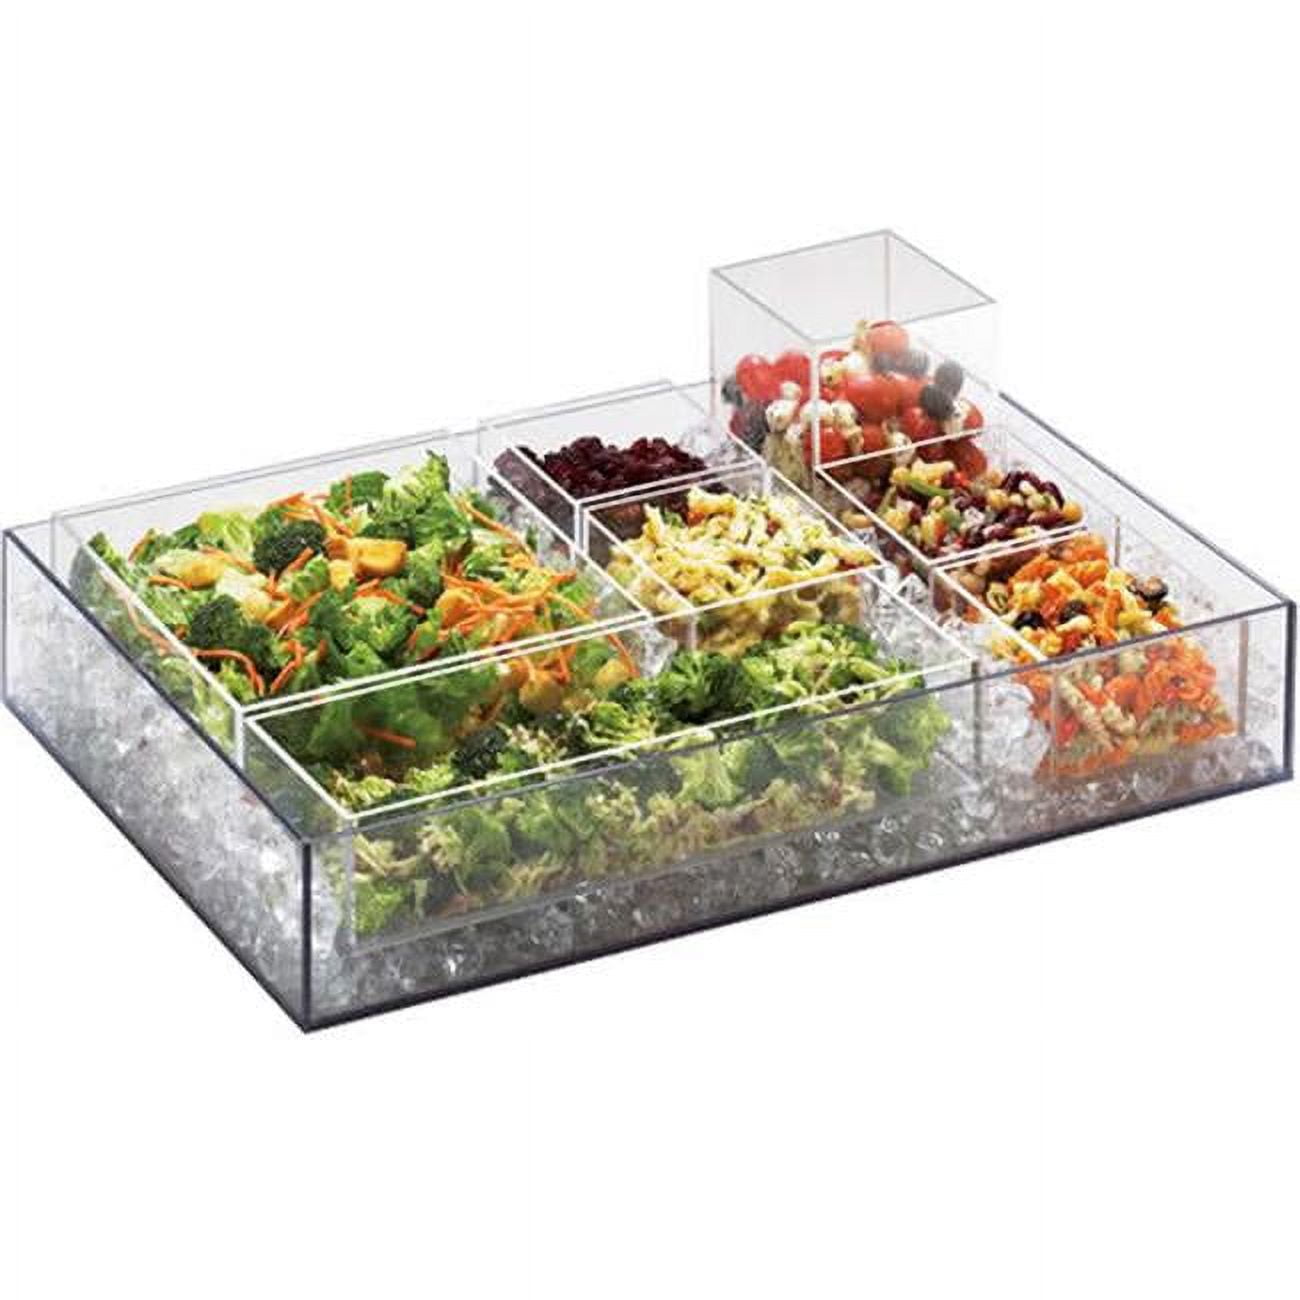 Picture of Cal Mil 1398-12 Cater Choice System Clear Ice Housing with Drain Kit - 24 x 32 x 4.25 in.